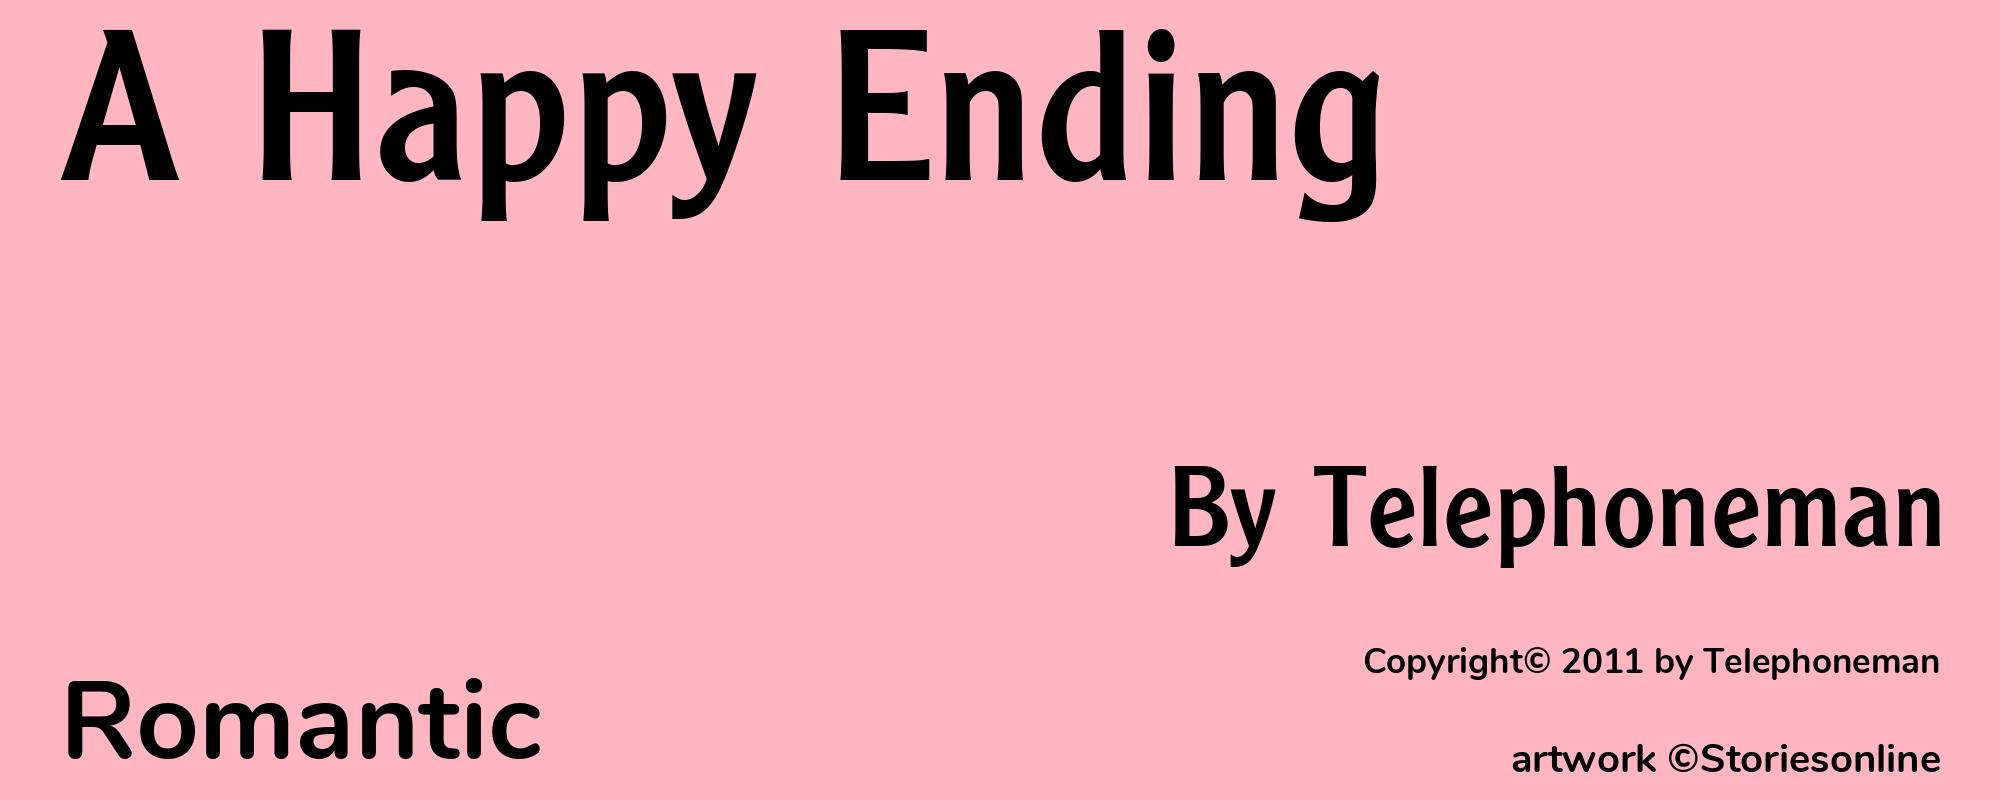 A Happy Ending - Cover